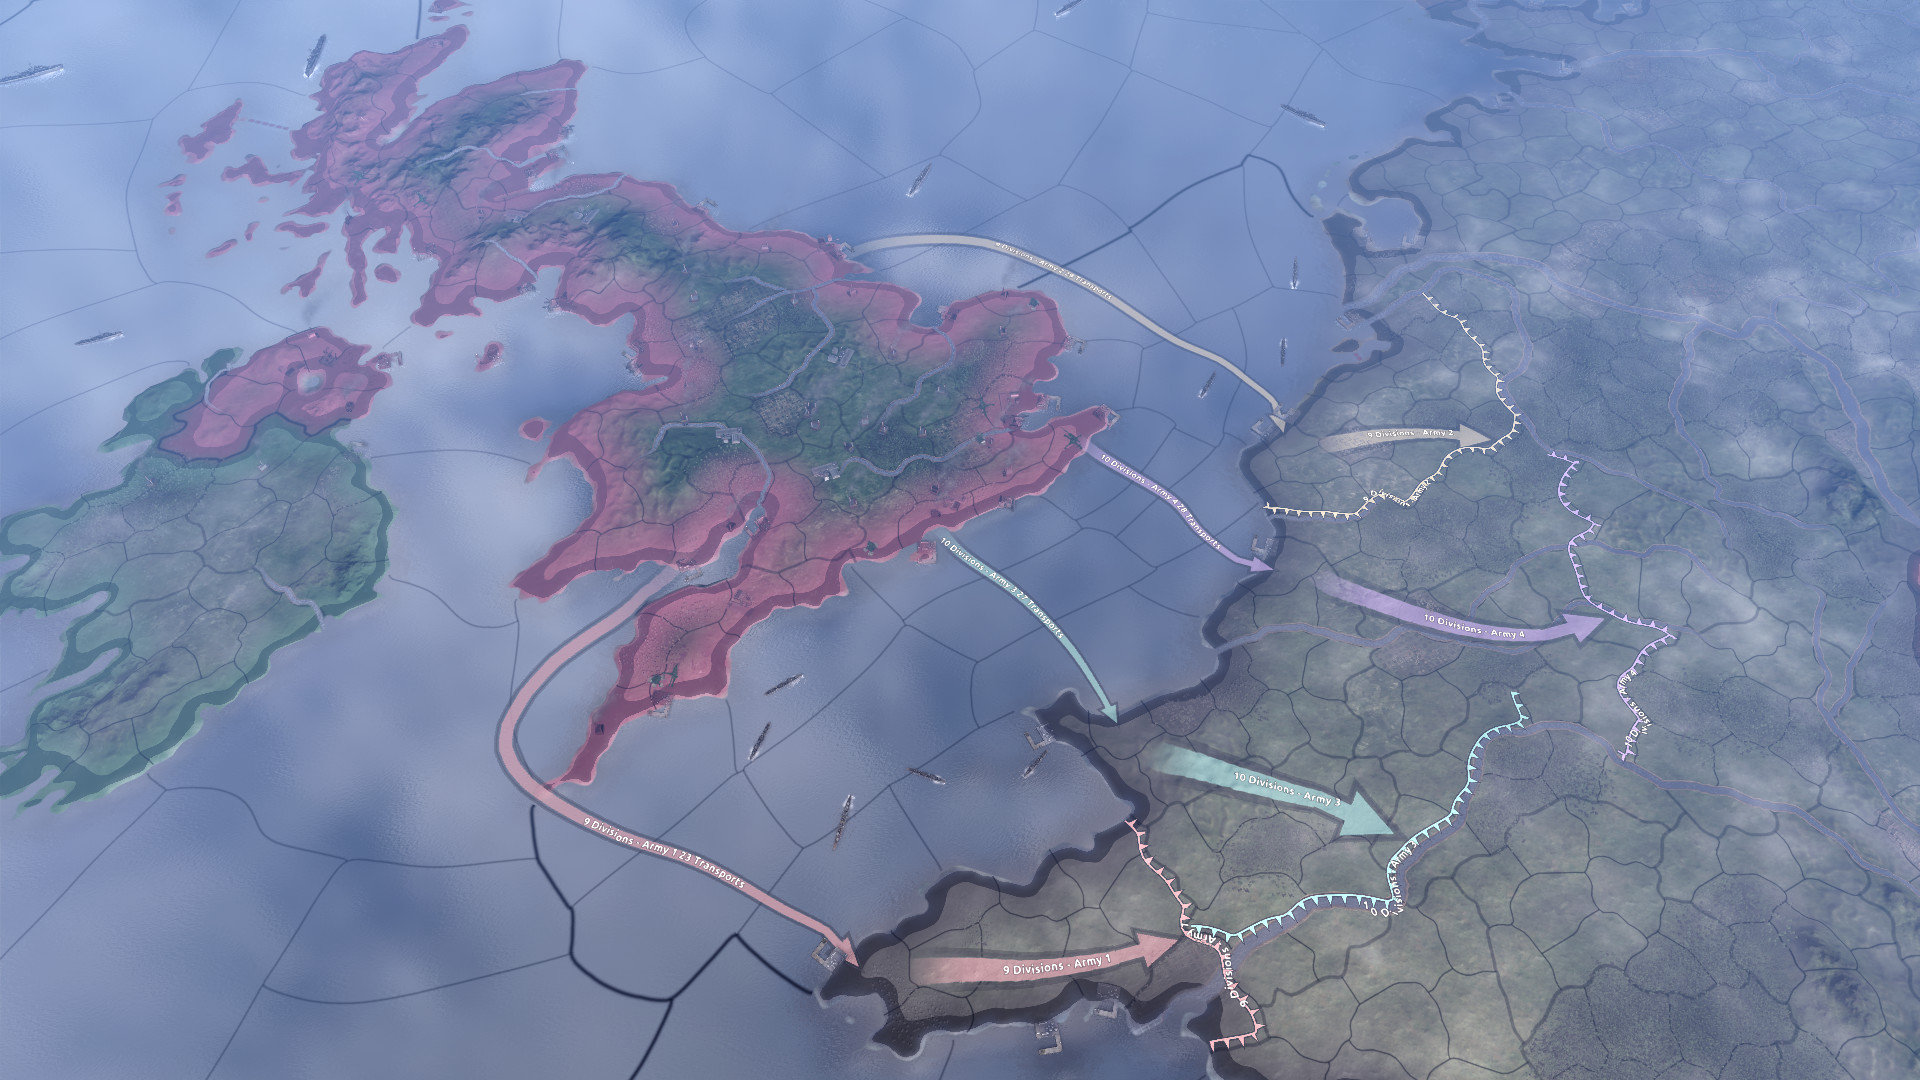 Hearts of Iron IV on Steam